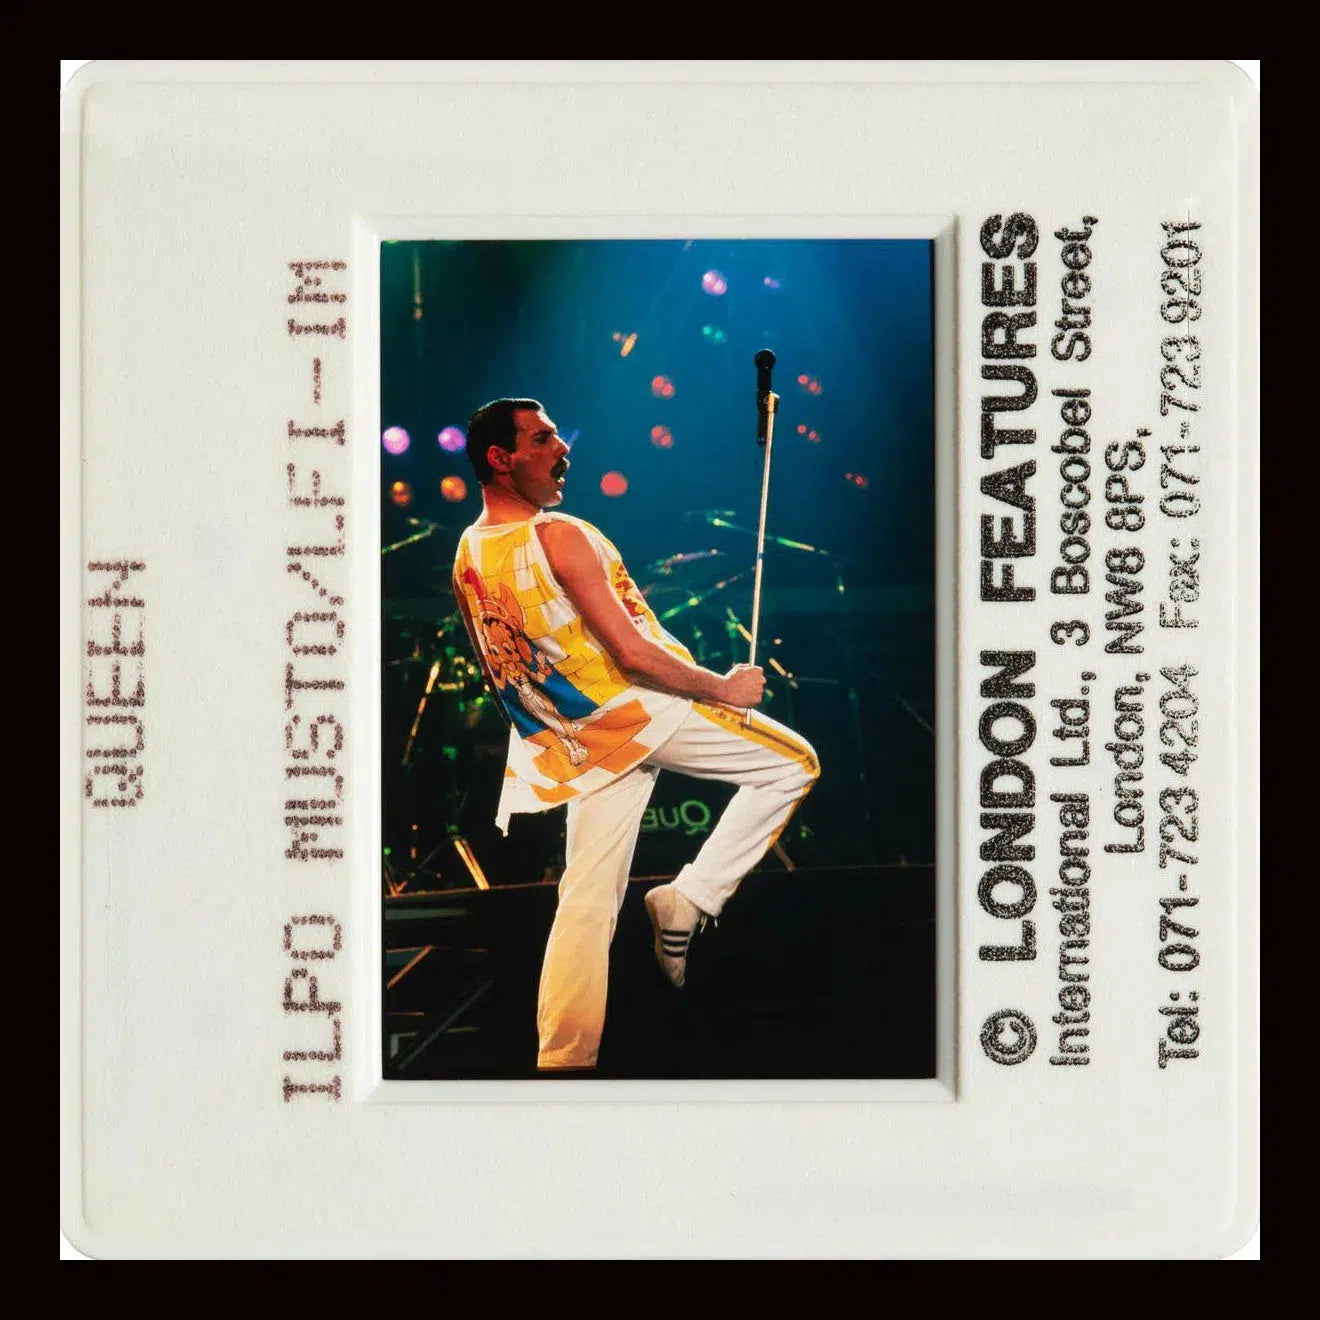 Freddy Mercury - Slide 5, from The Wild Ones collection-PurePhoto